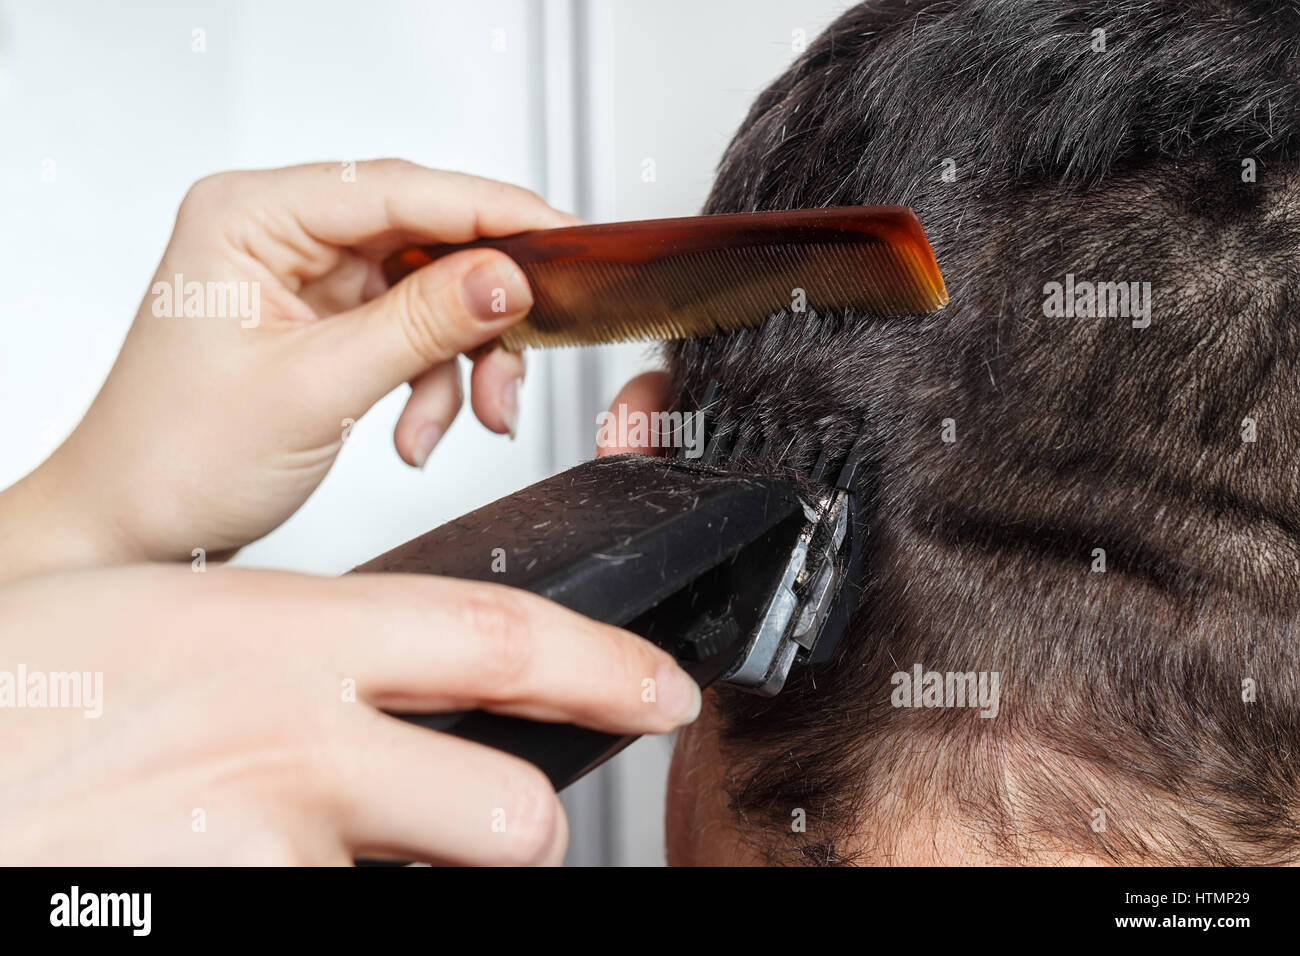 man haircut by clipper and comb Stock Photo